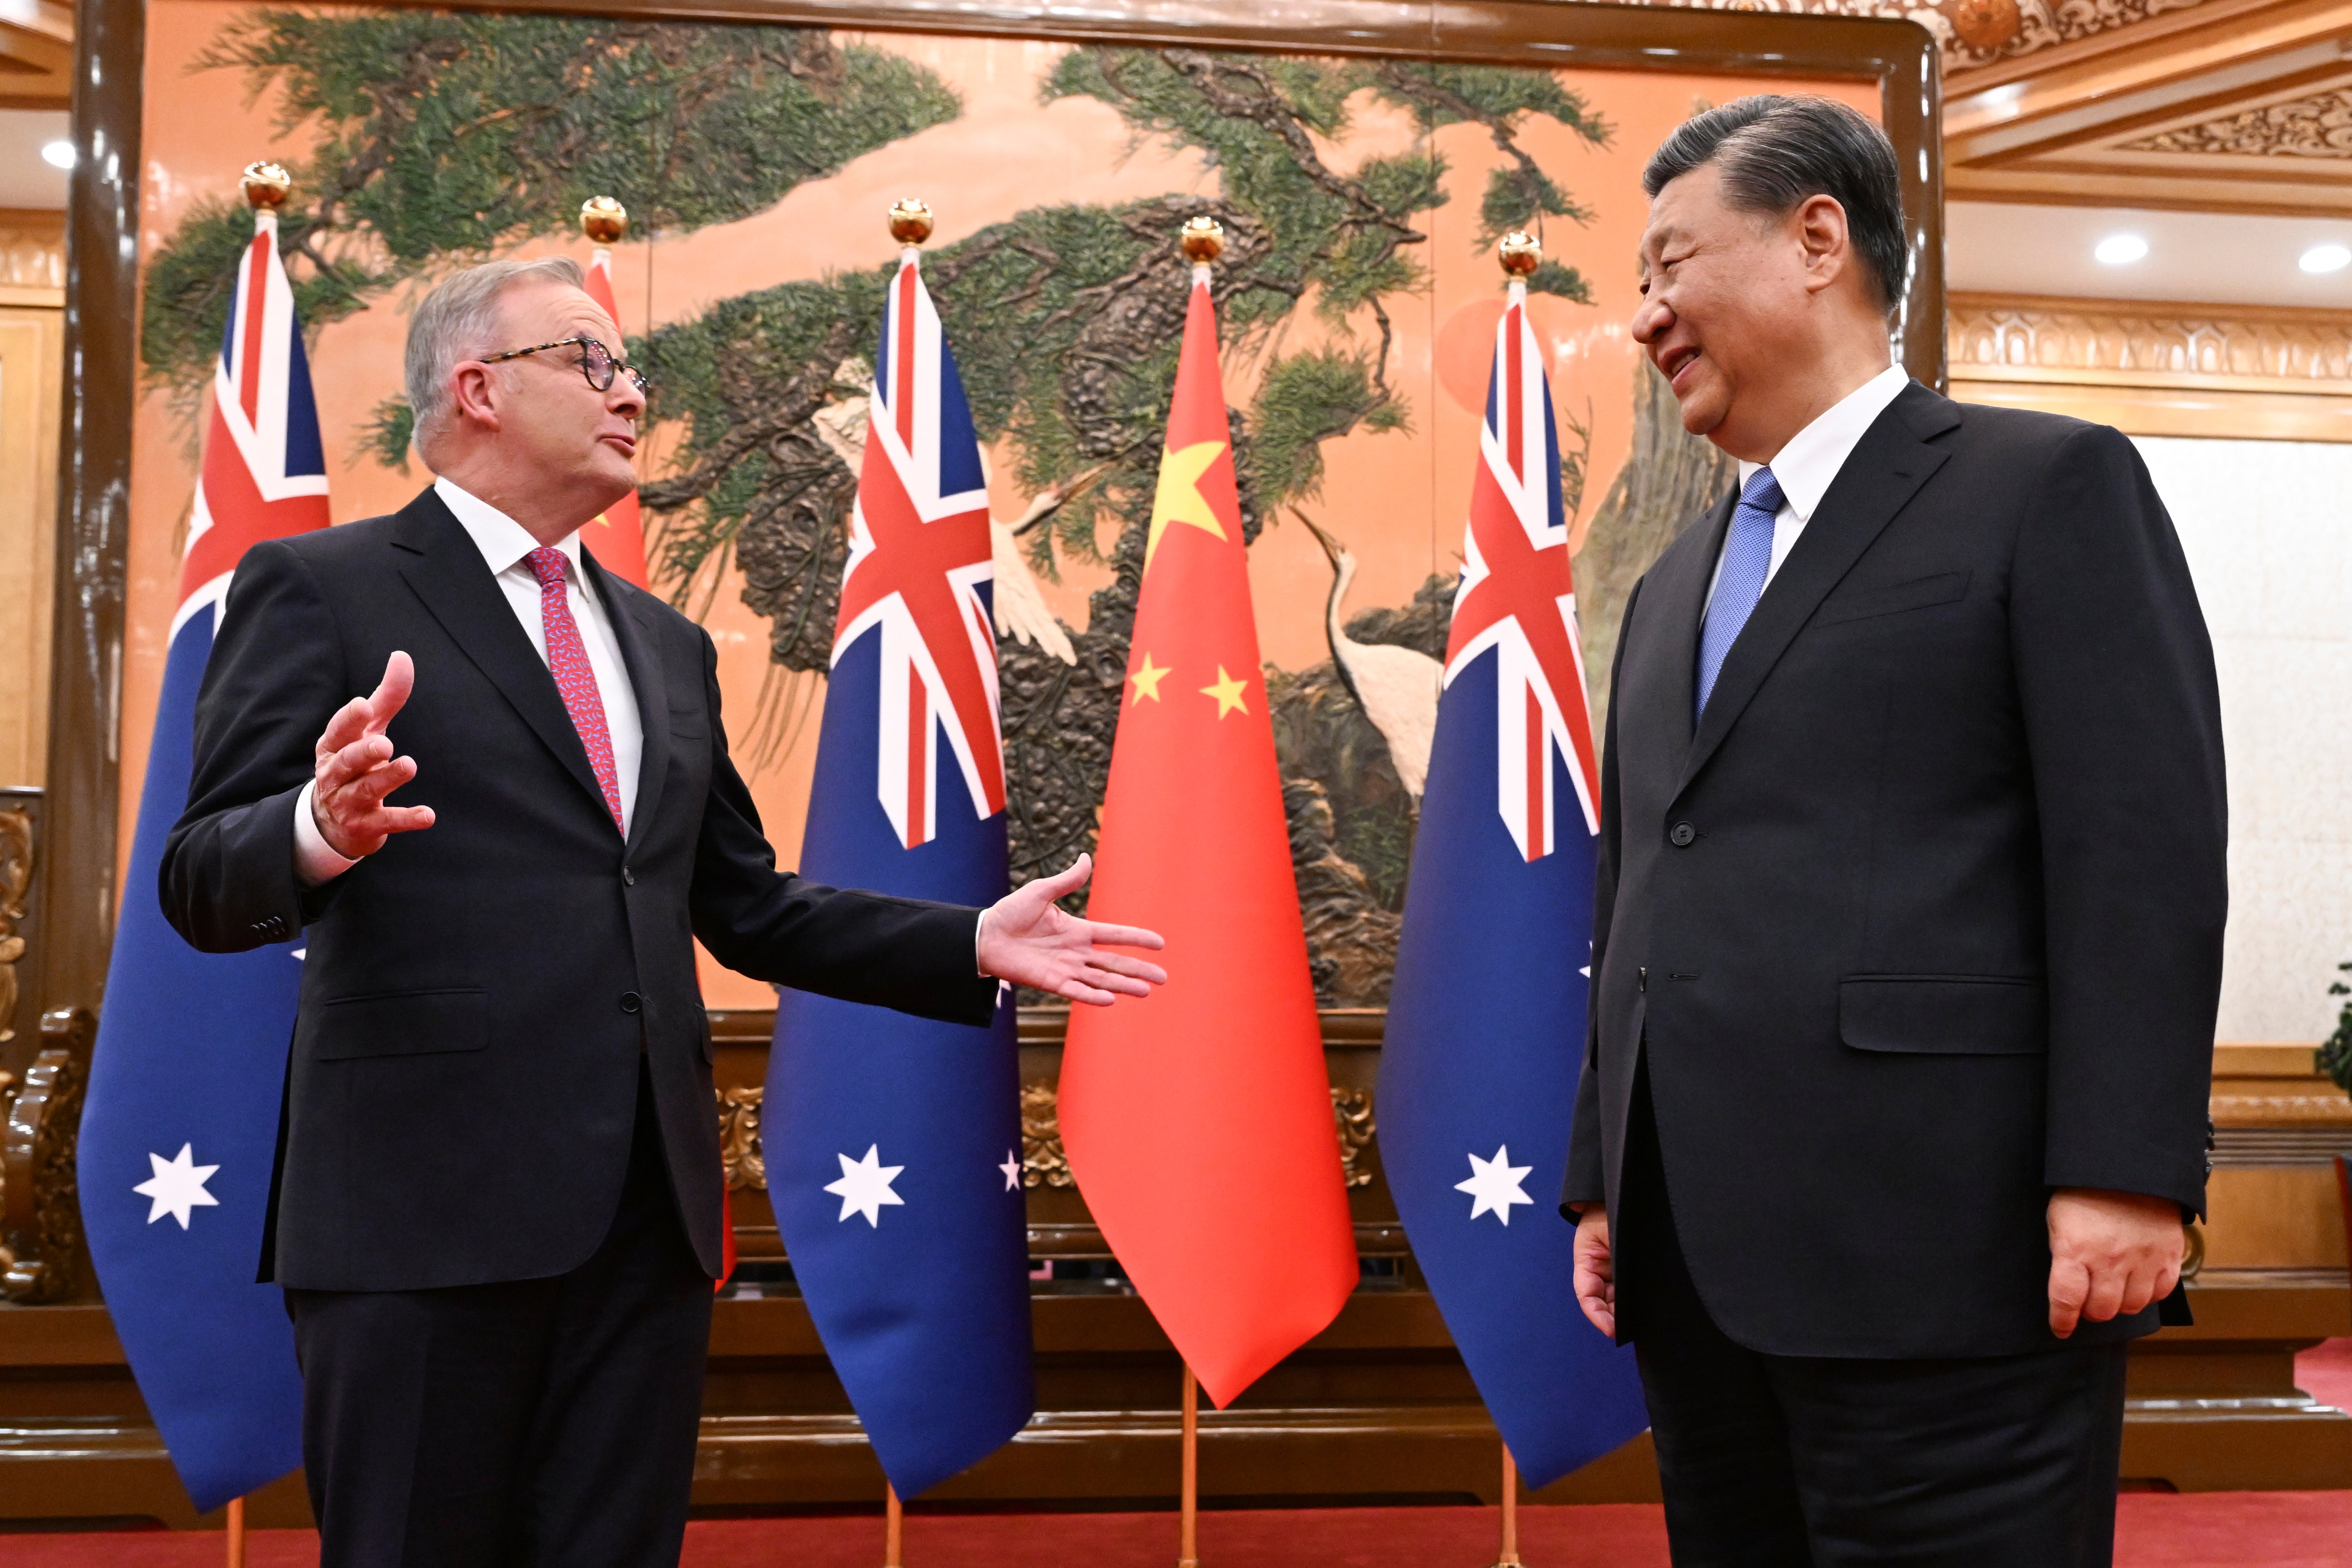 Australia's Prime Minister Anthony Albanese, left, gestures as he meets with China's President Xi Jinping at the Great Hall of the People in Beijing